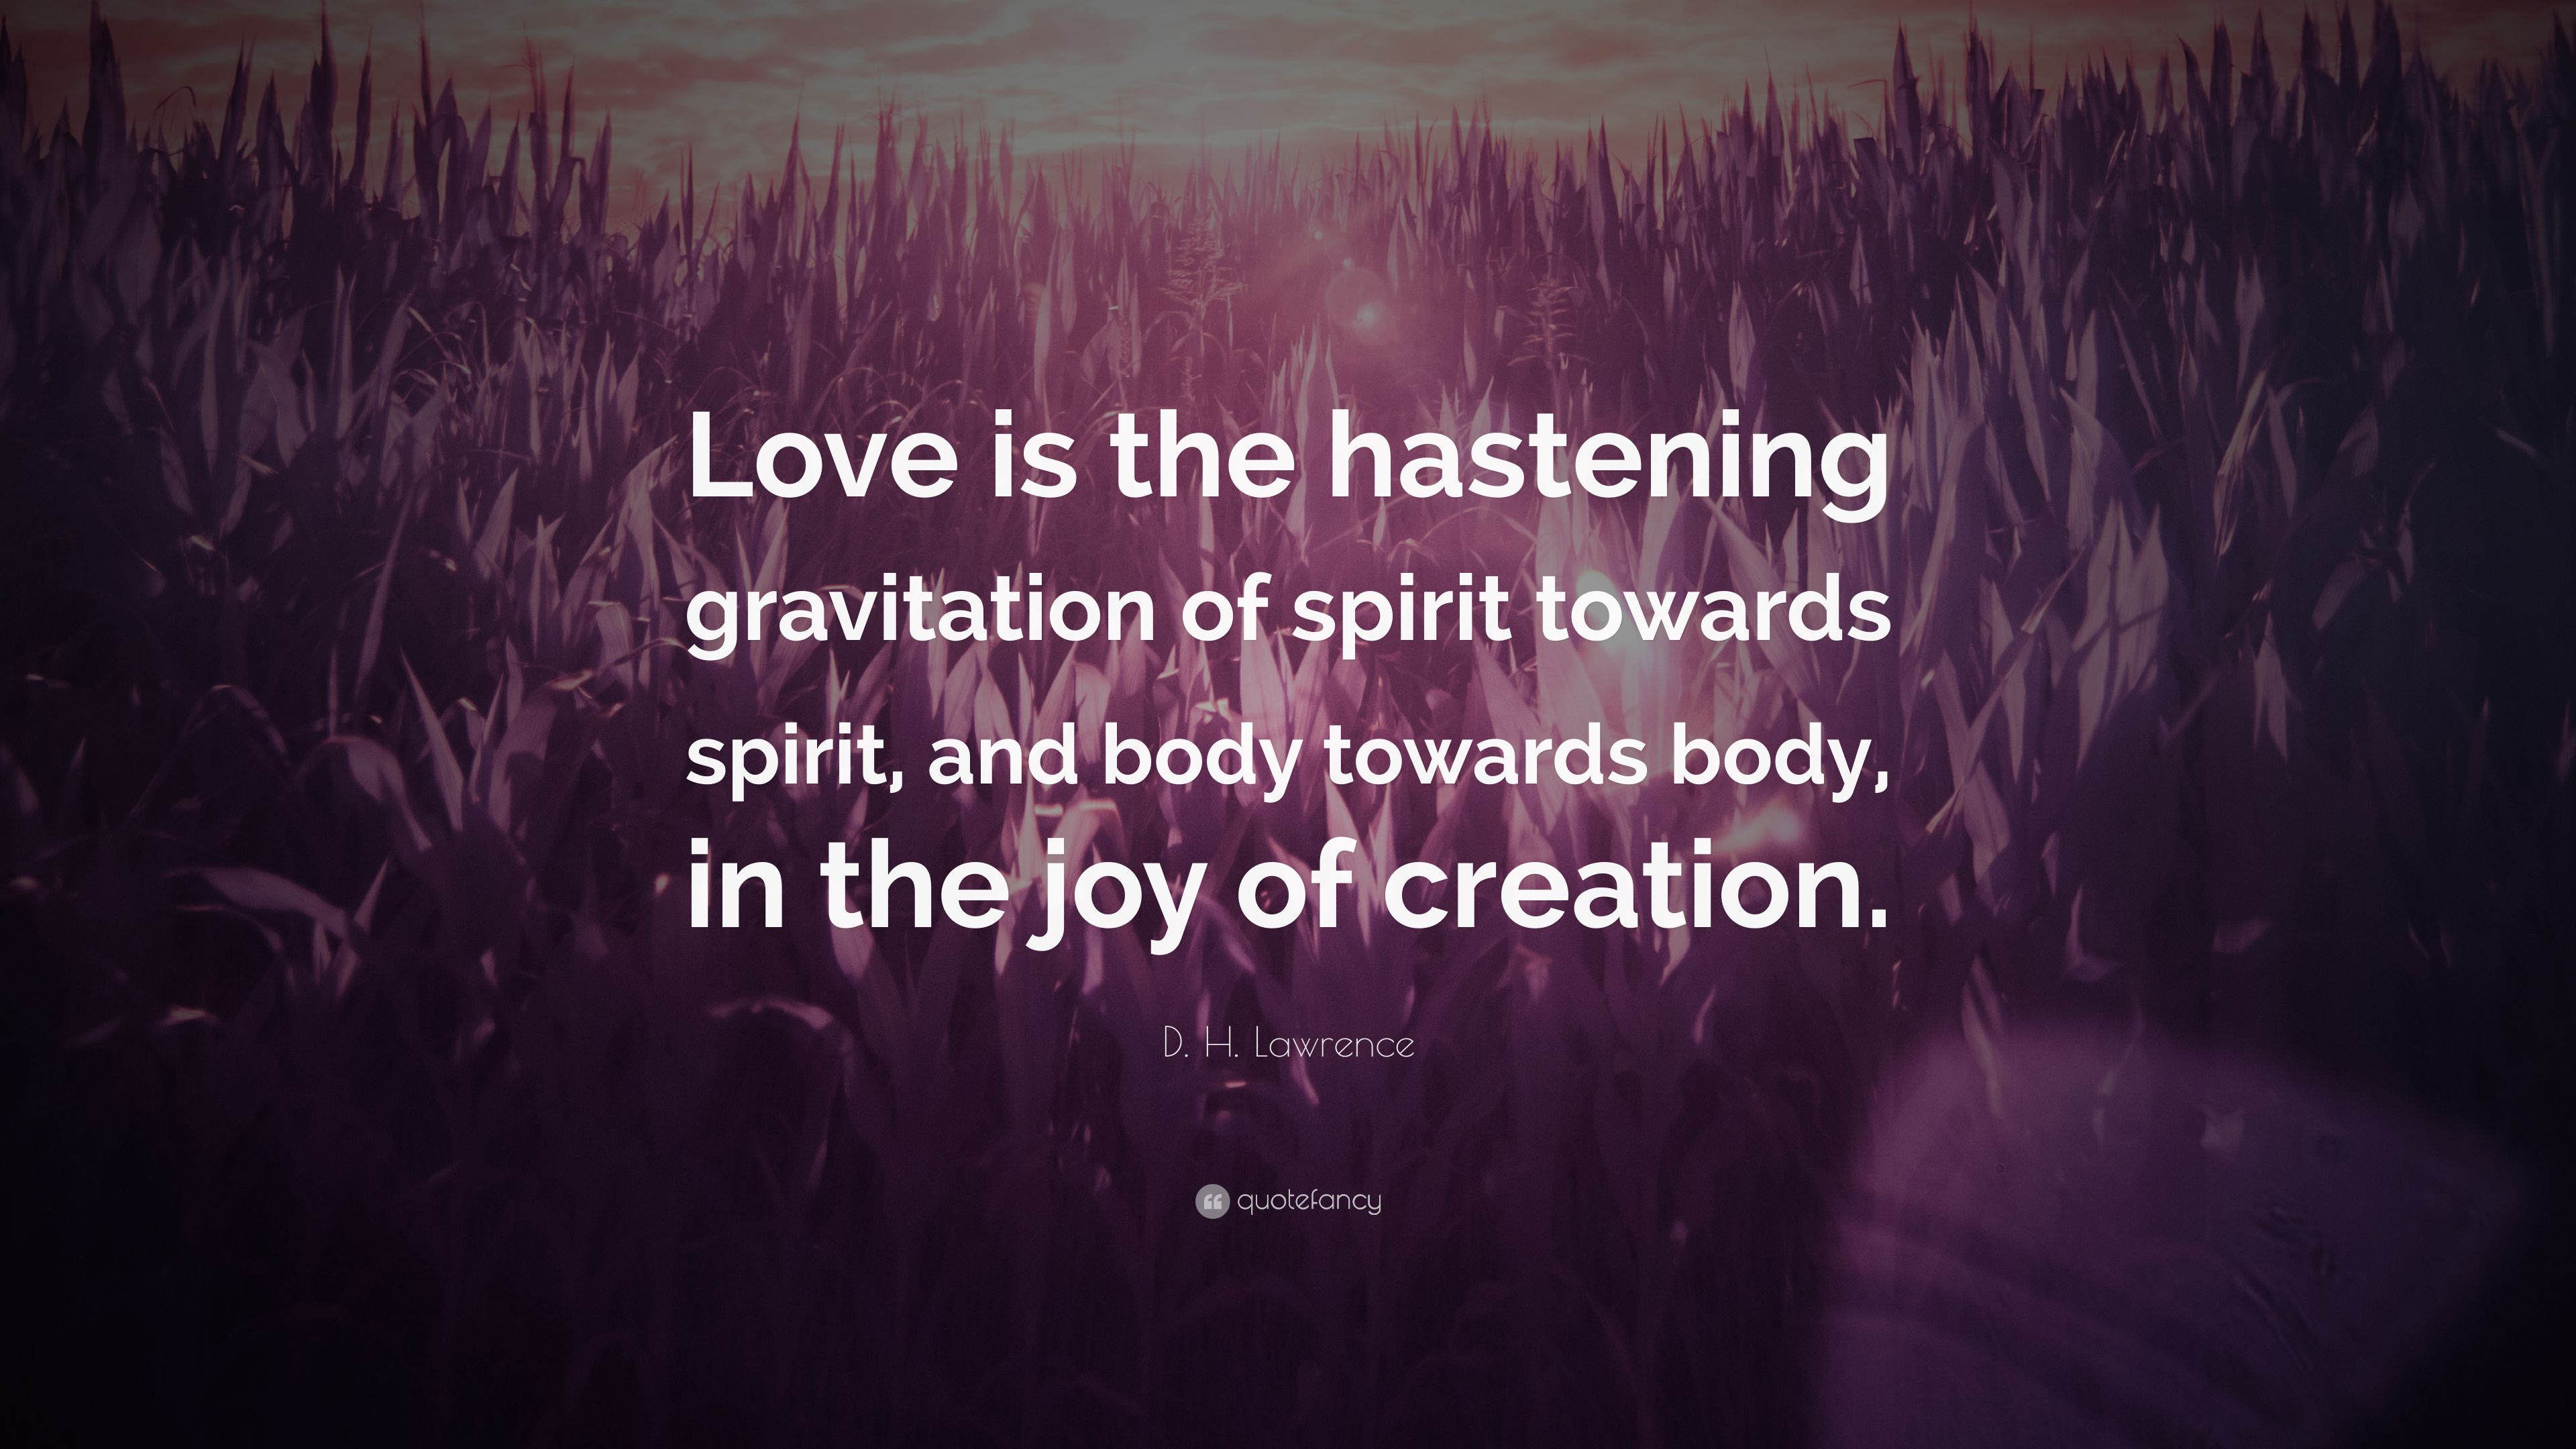 D. H. Lawrence Quote: “Love is the hastening gravitation of spirit